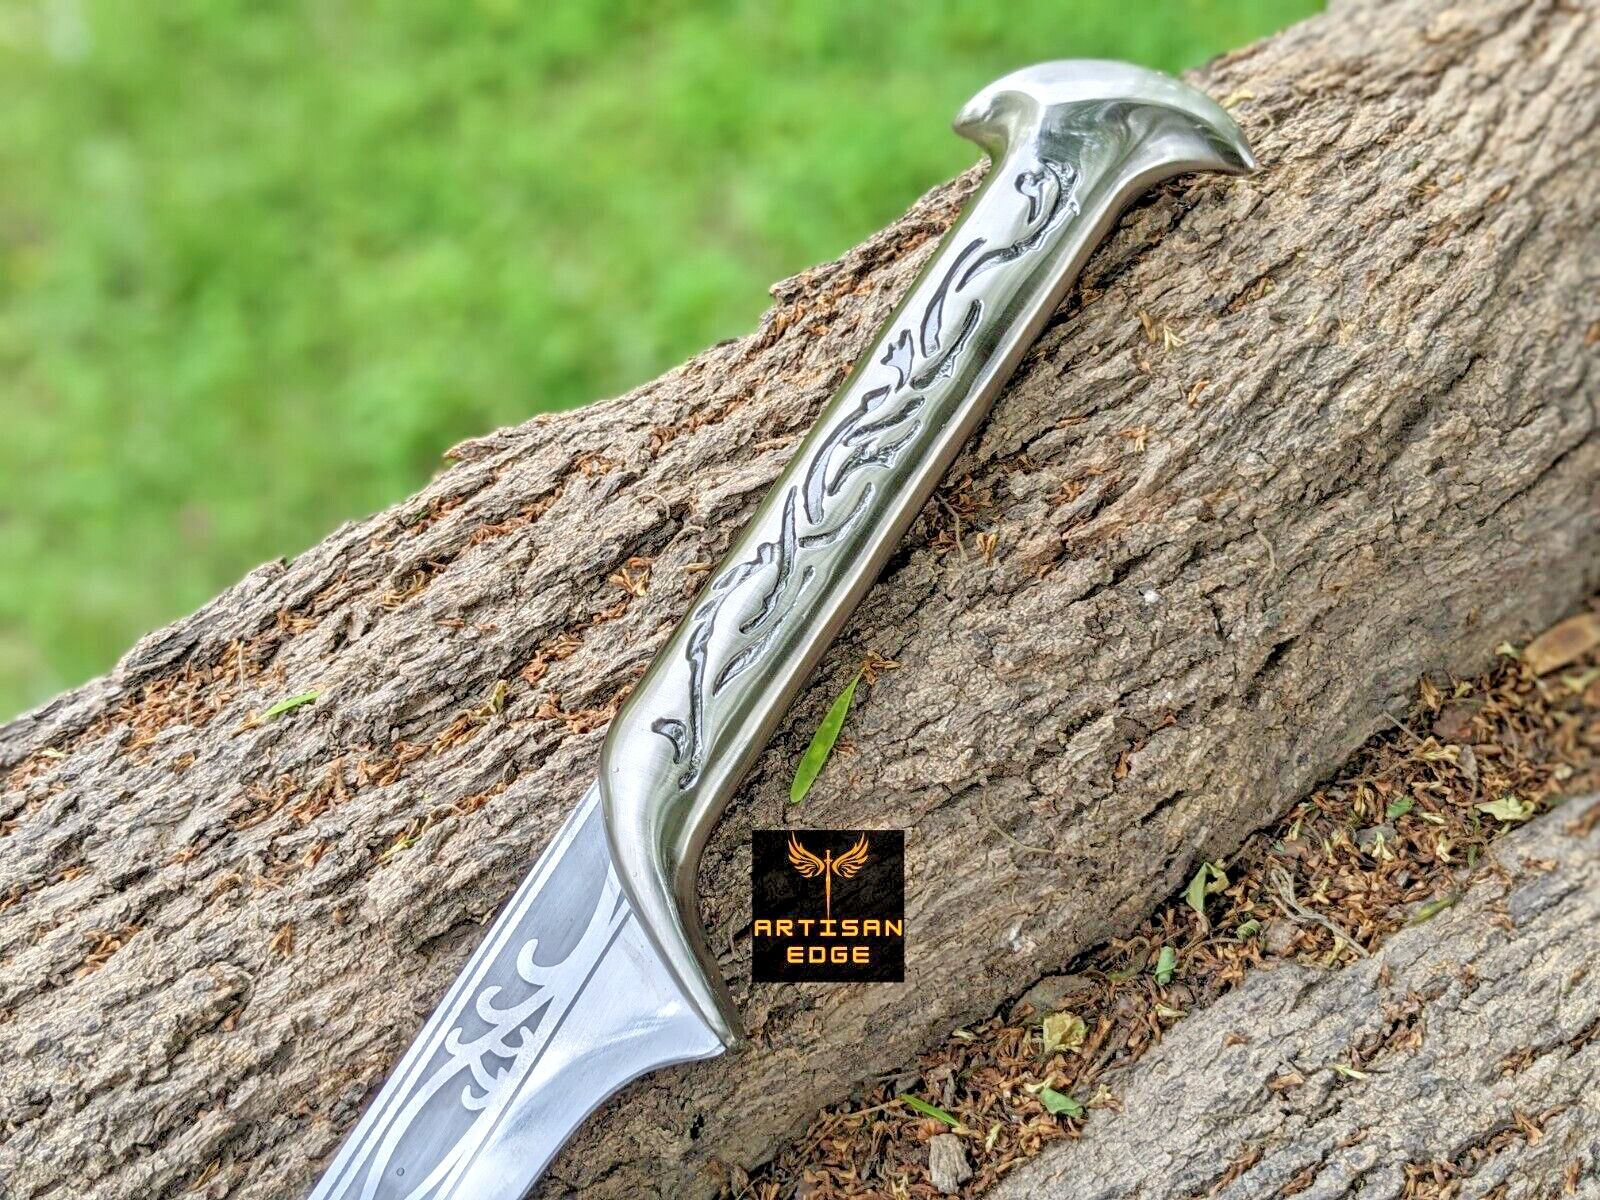 THE HOBBIT ELVENKING Sword Leaf Engrave Lord of The Rings Thranduil REPLICA GIFT